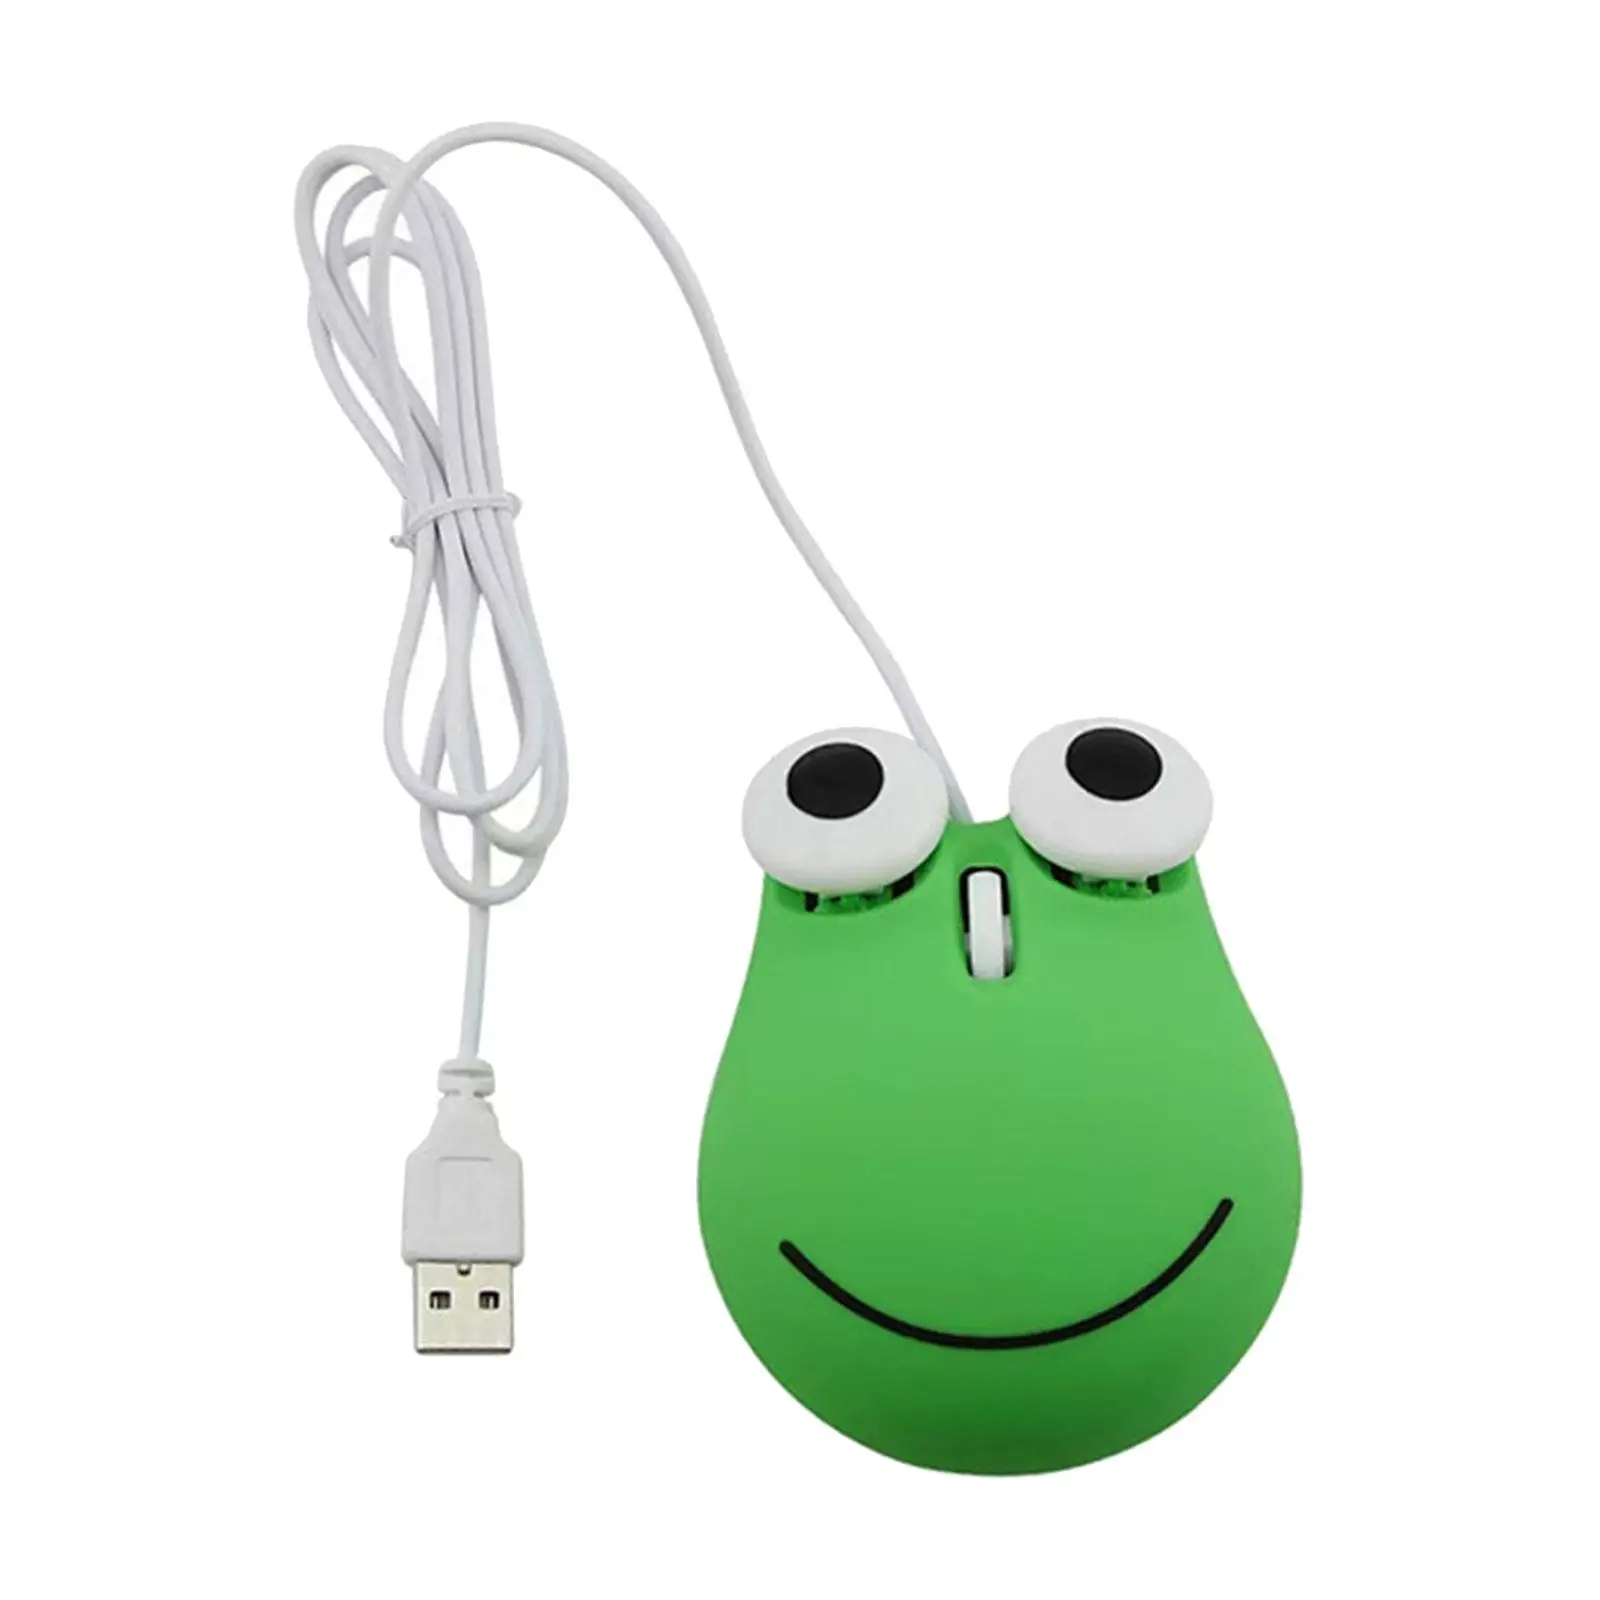 

Wired Mice, Big Eyed Green Frog Cute Mice, Home and Office Use, with 135cm Long USB Cable for Desktop Laptop Notebook